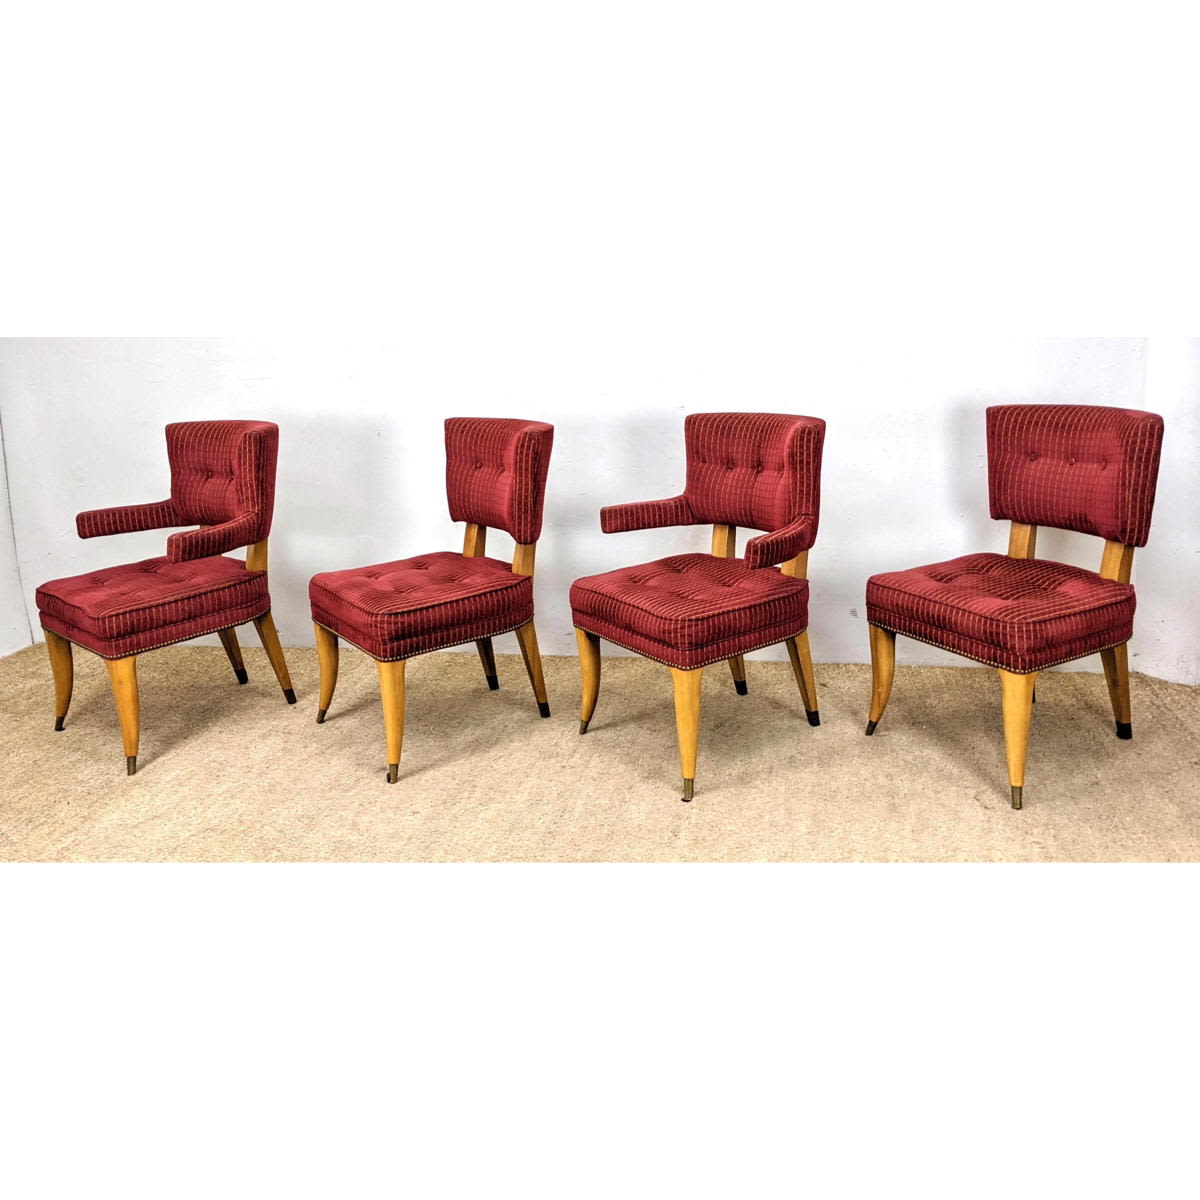 Set 4 Blond Wood Frame Dining Chairs.